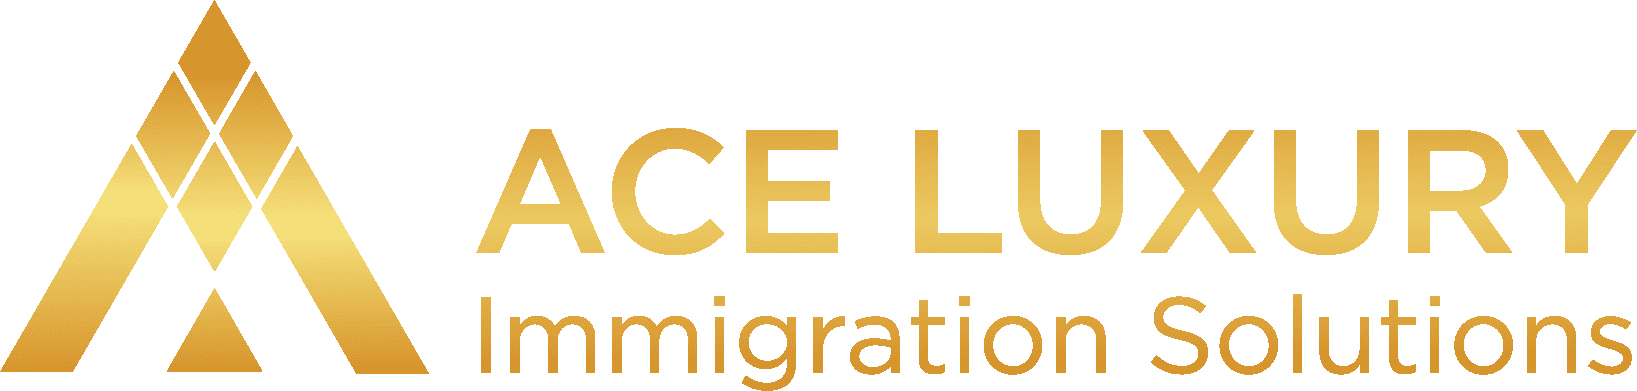 Ace Luxury Immigrations Solutions Logo